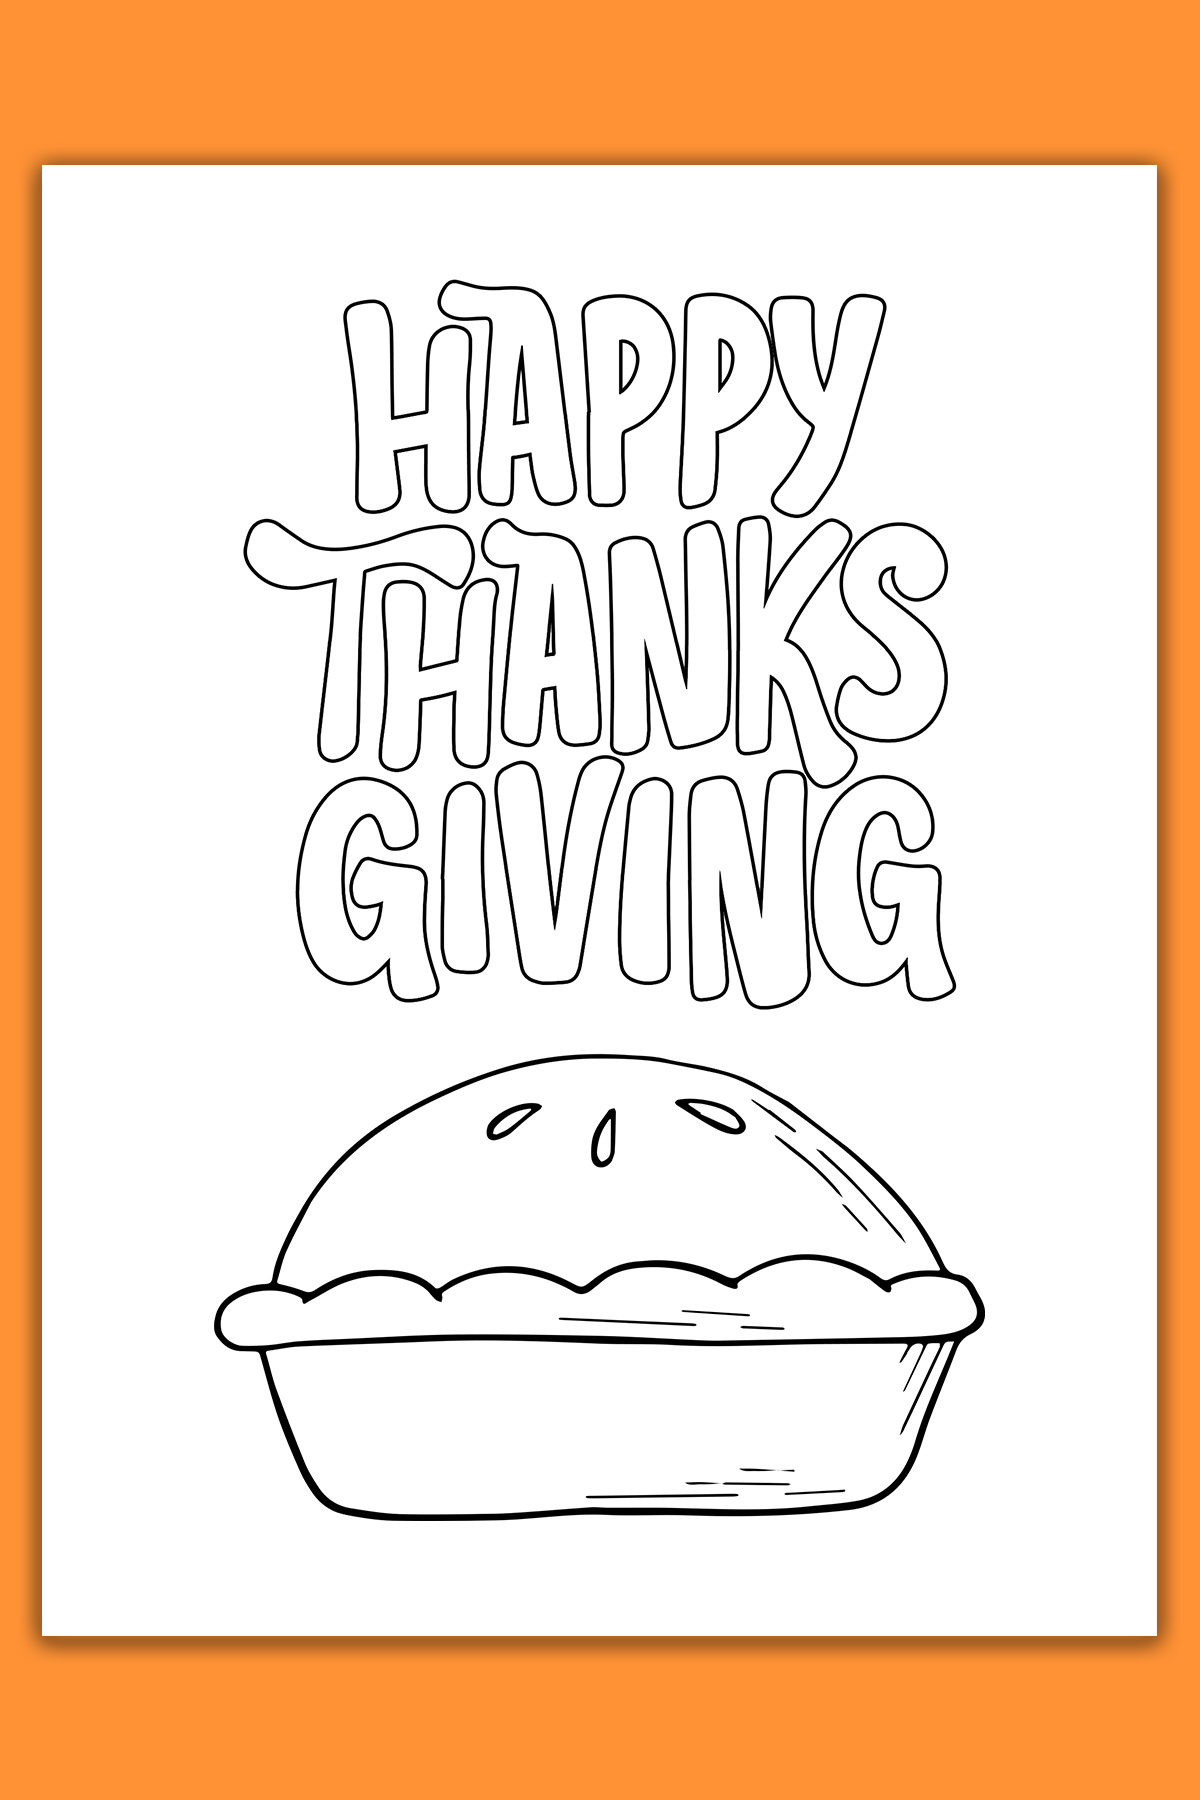 This image shows one of the cards from the thanksgiving cards coloring pages set. It says Happy Thanks Giving. Below that is a drawing of a whole pie.